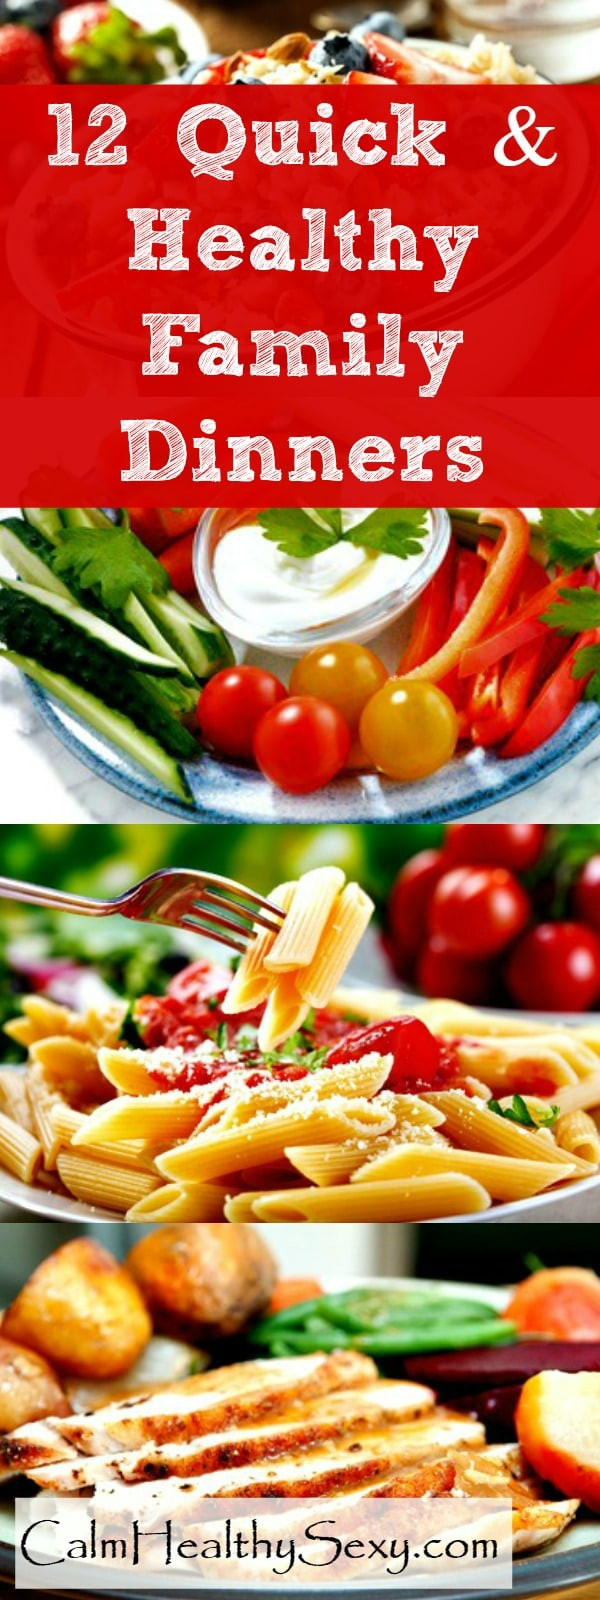 Quick and Healthy Dinner 20 Ideas for 12 Quick and Healthy Family Dinners for Busy Moms with